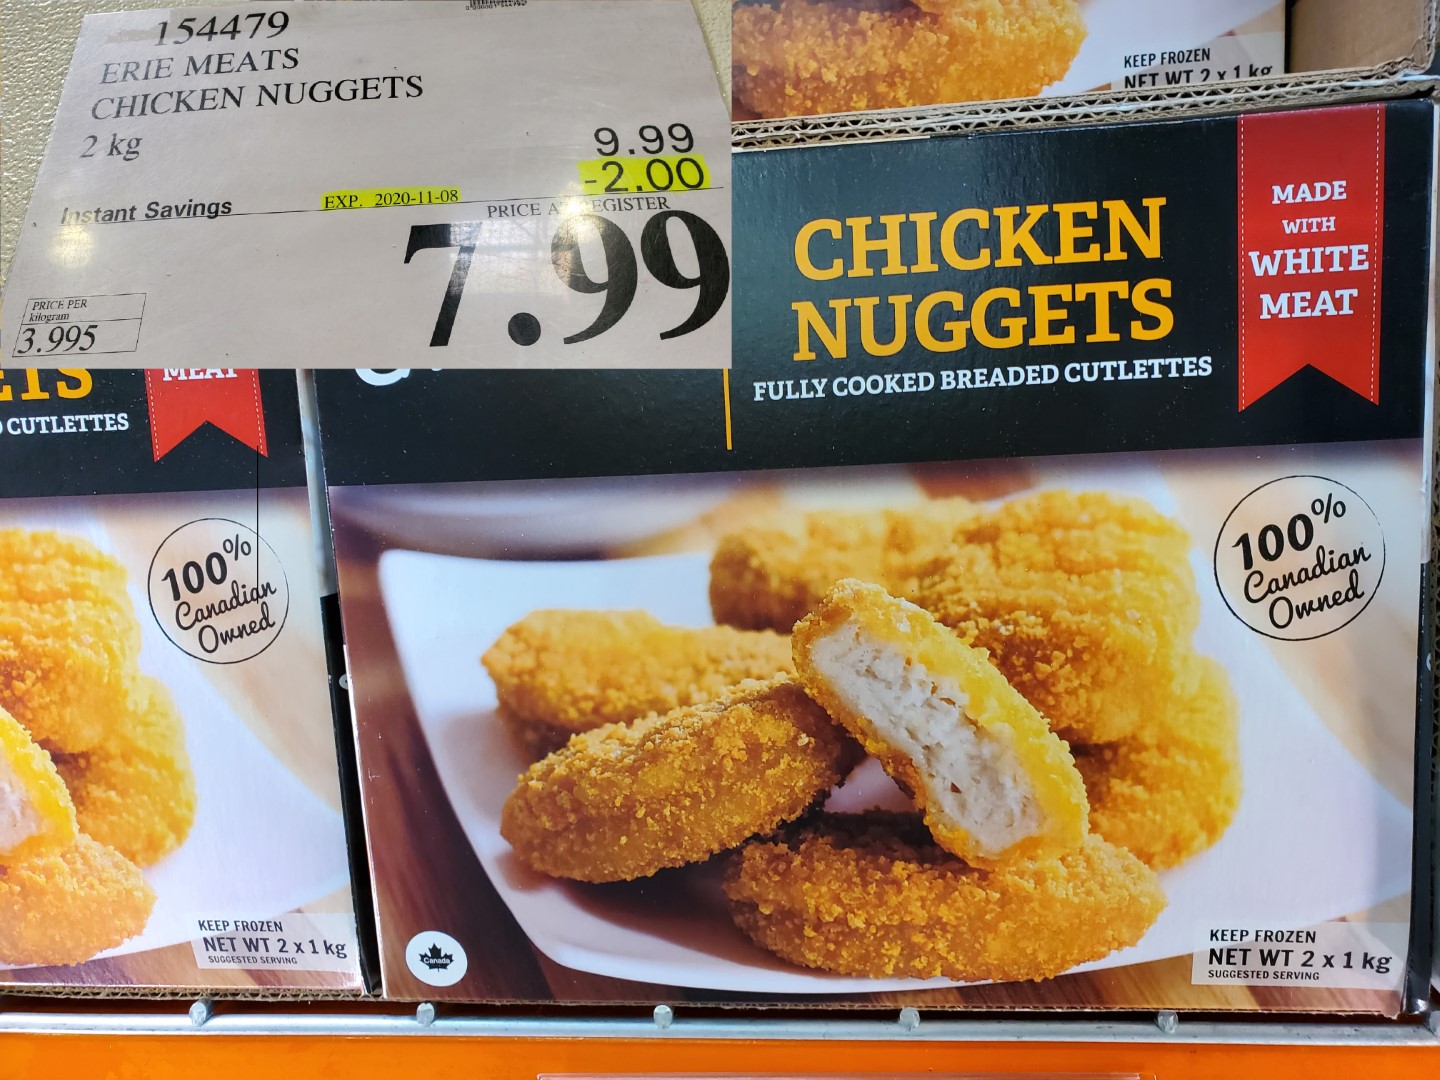 erie meats chicken nuggets